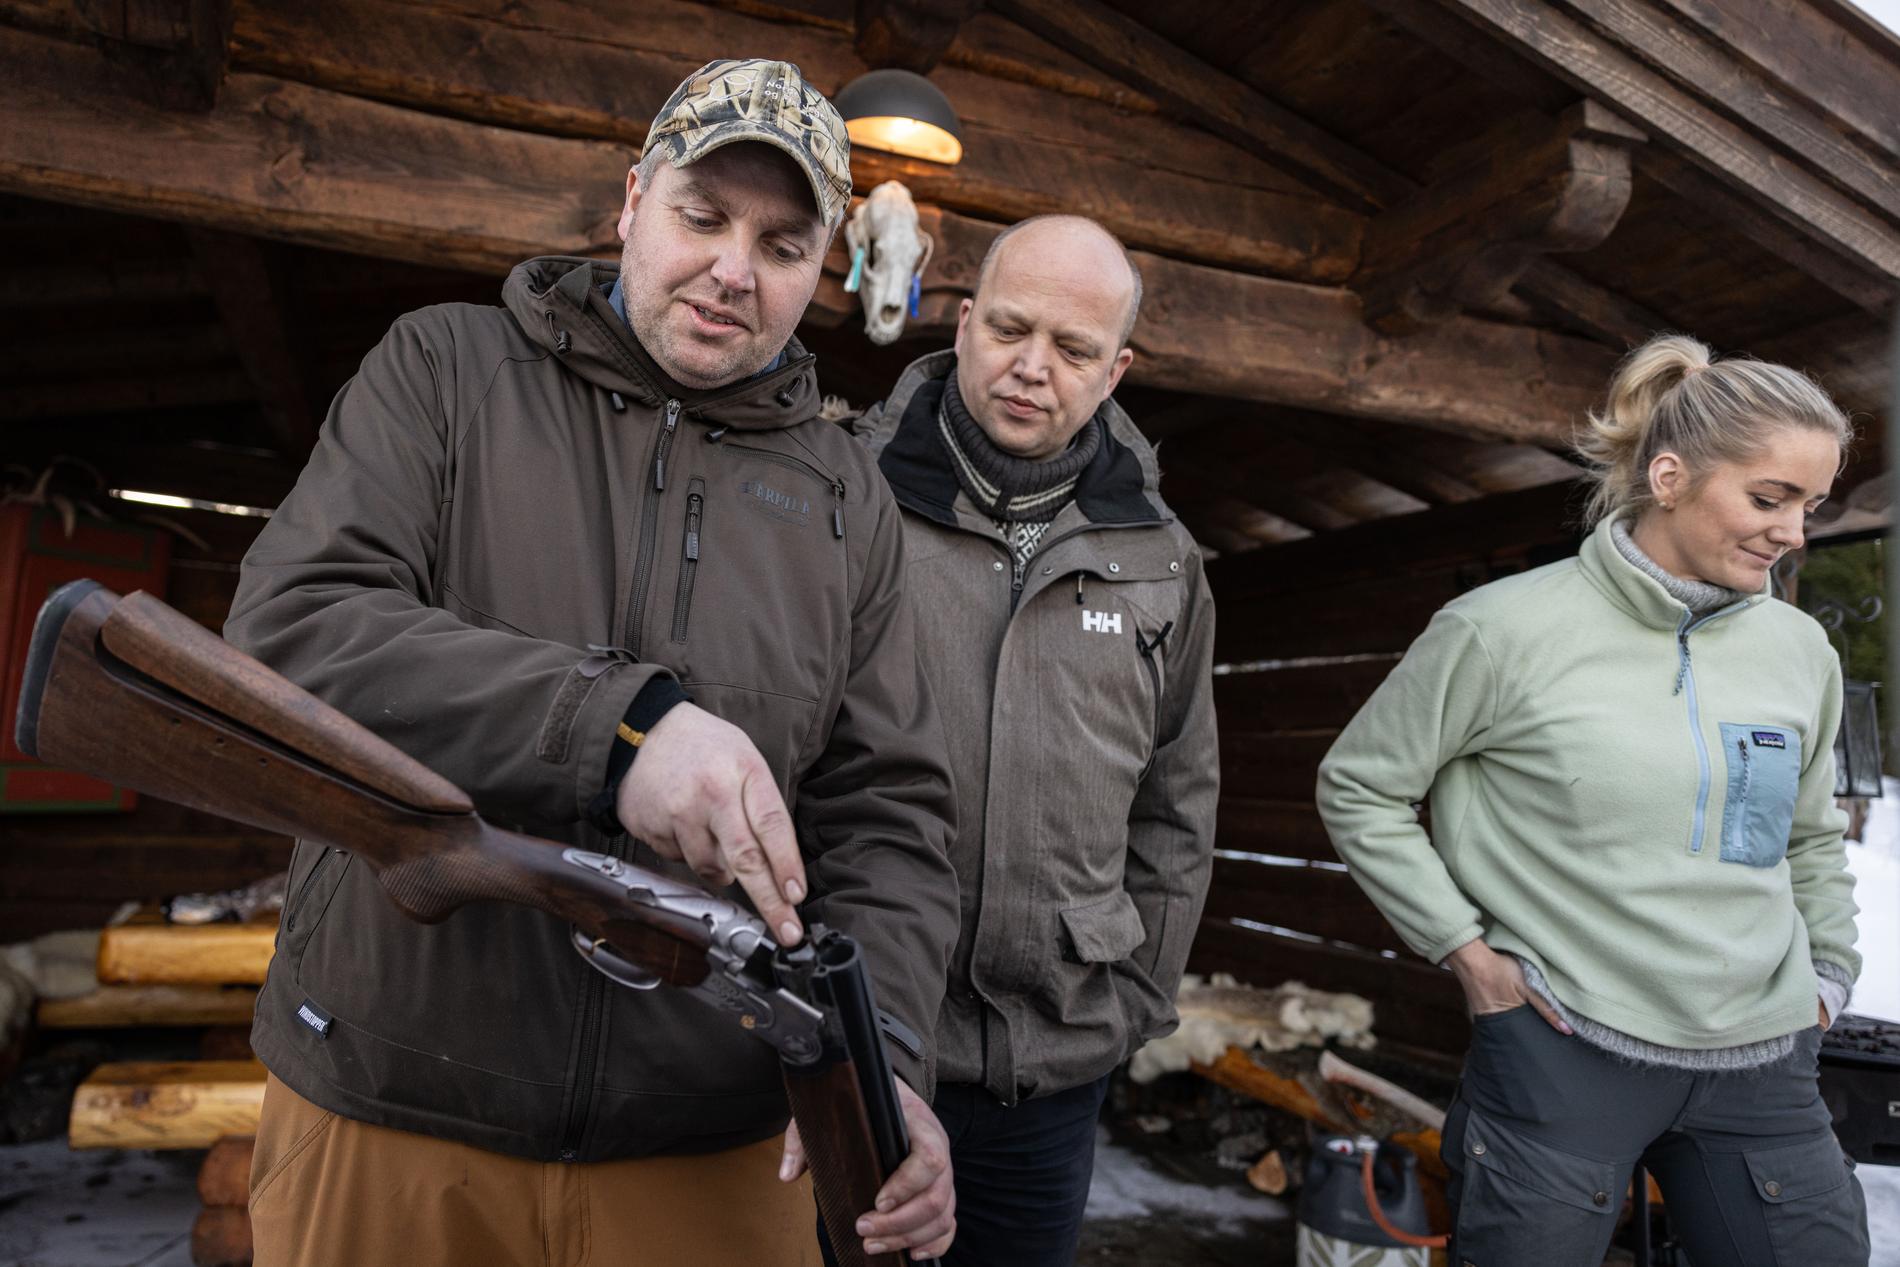 SP Leader Trygve Slagsvold Vedum Watches Norwegian Hunters’ and Fishermen’s Association Demonstration of Daily Gun Use, Justice Minister Emilie Enger Mehl Condemns Activists’ Methods